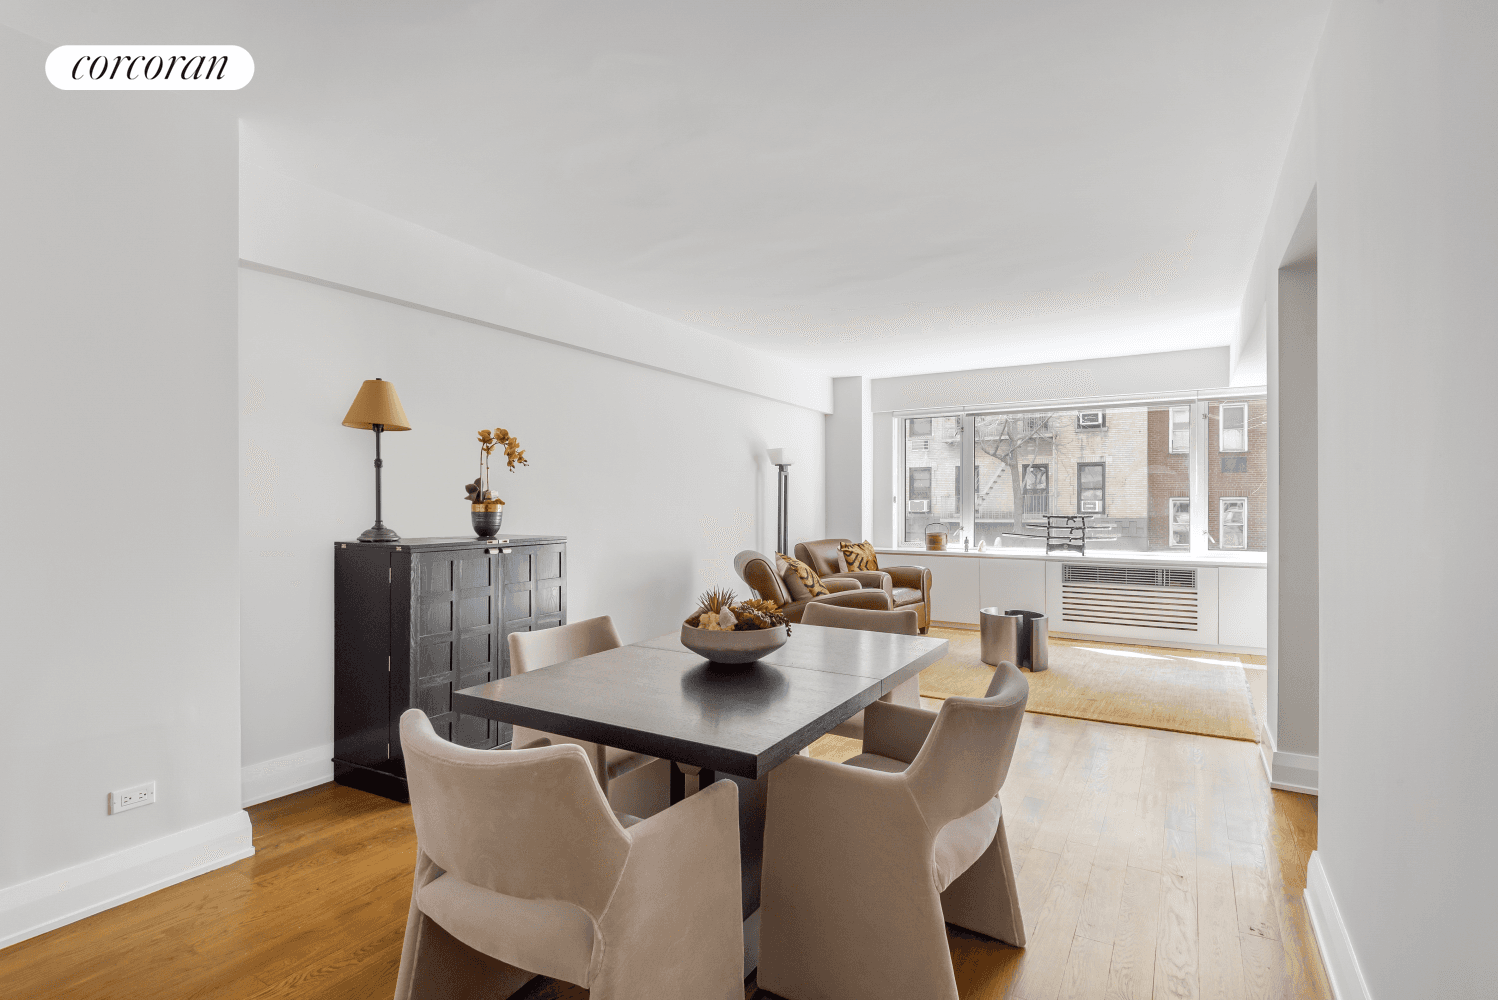 Pack your suitcase and move right in to this beautifully appointed condo located in the thriving heart of Midtown East !